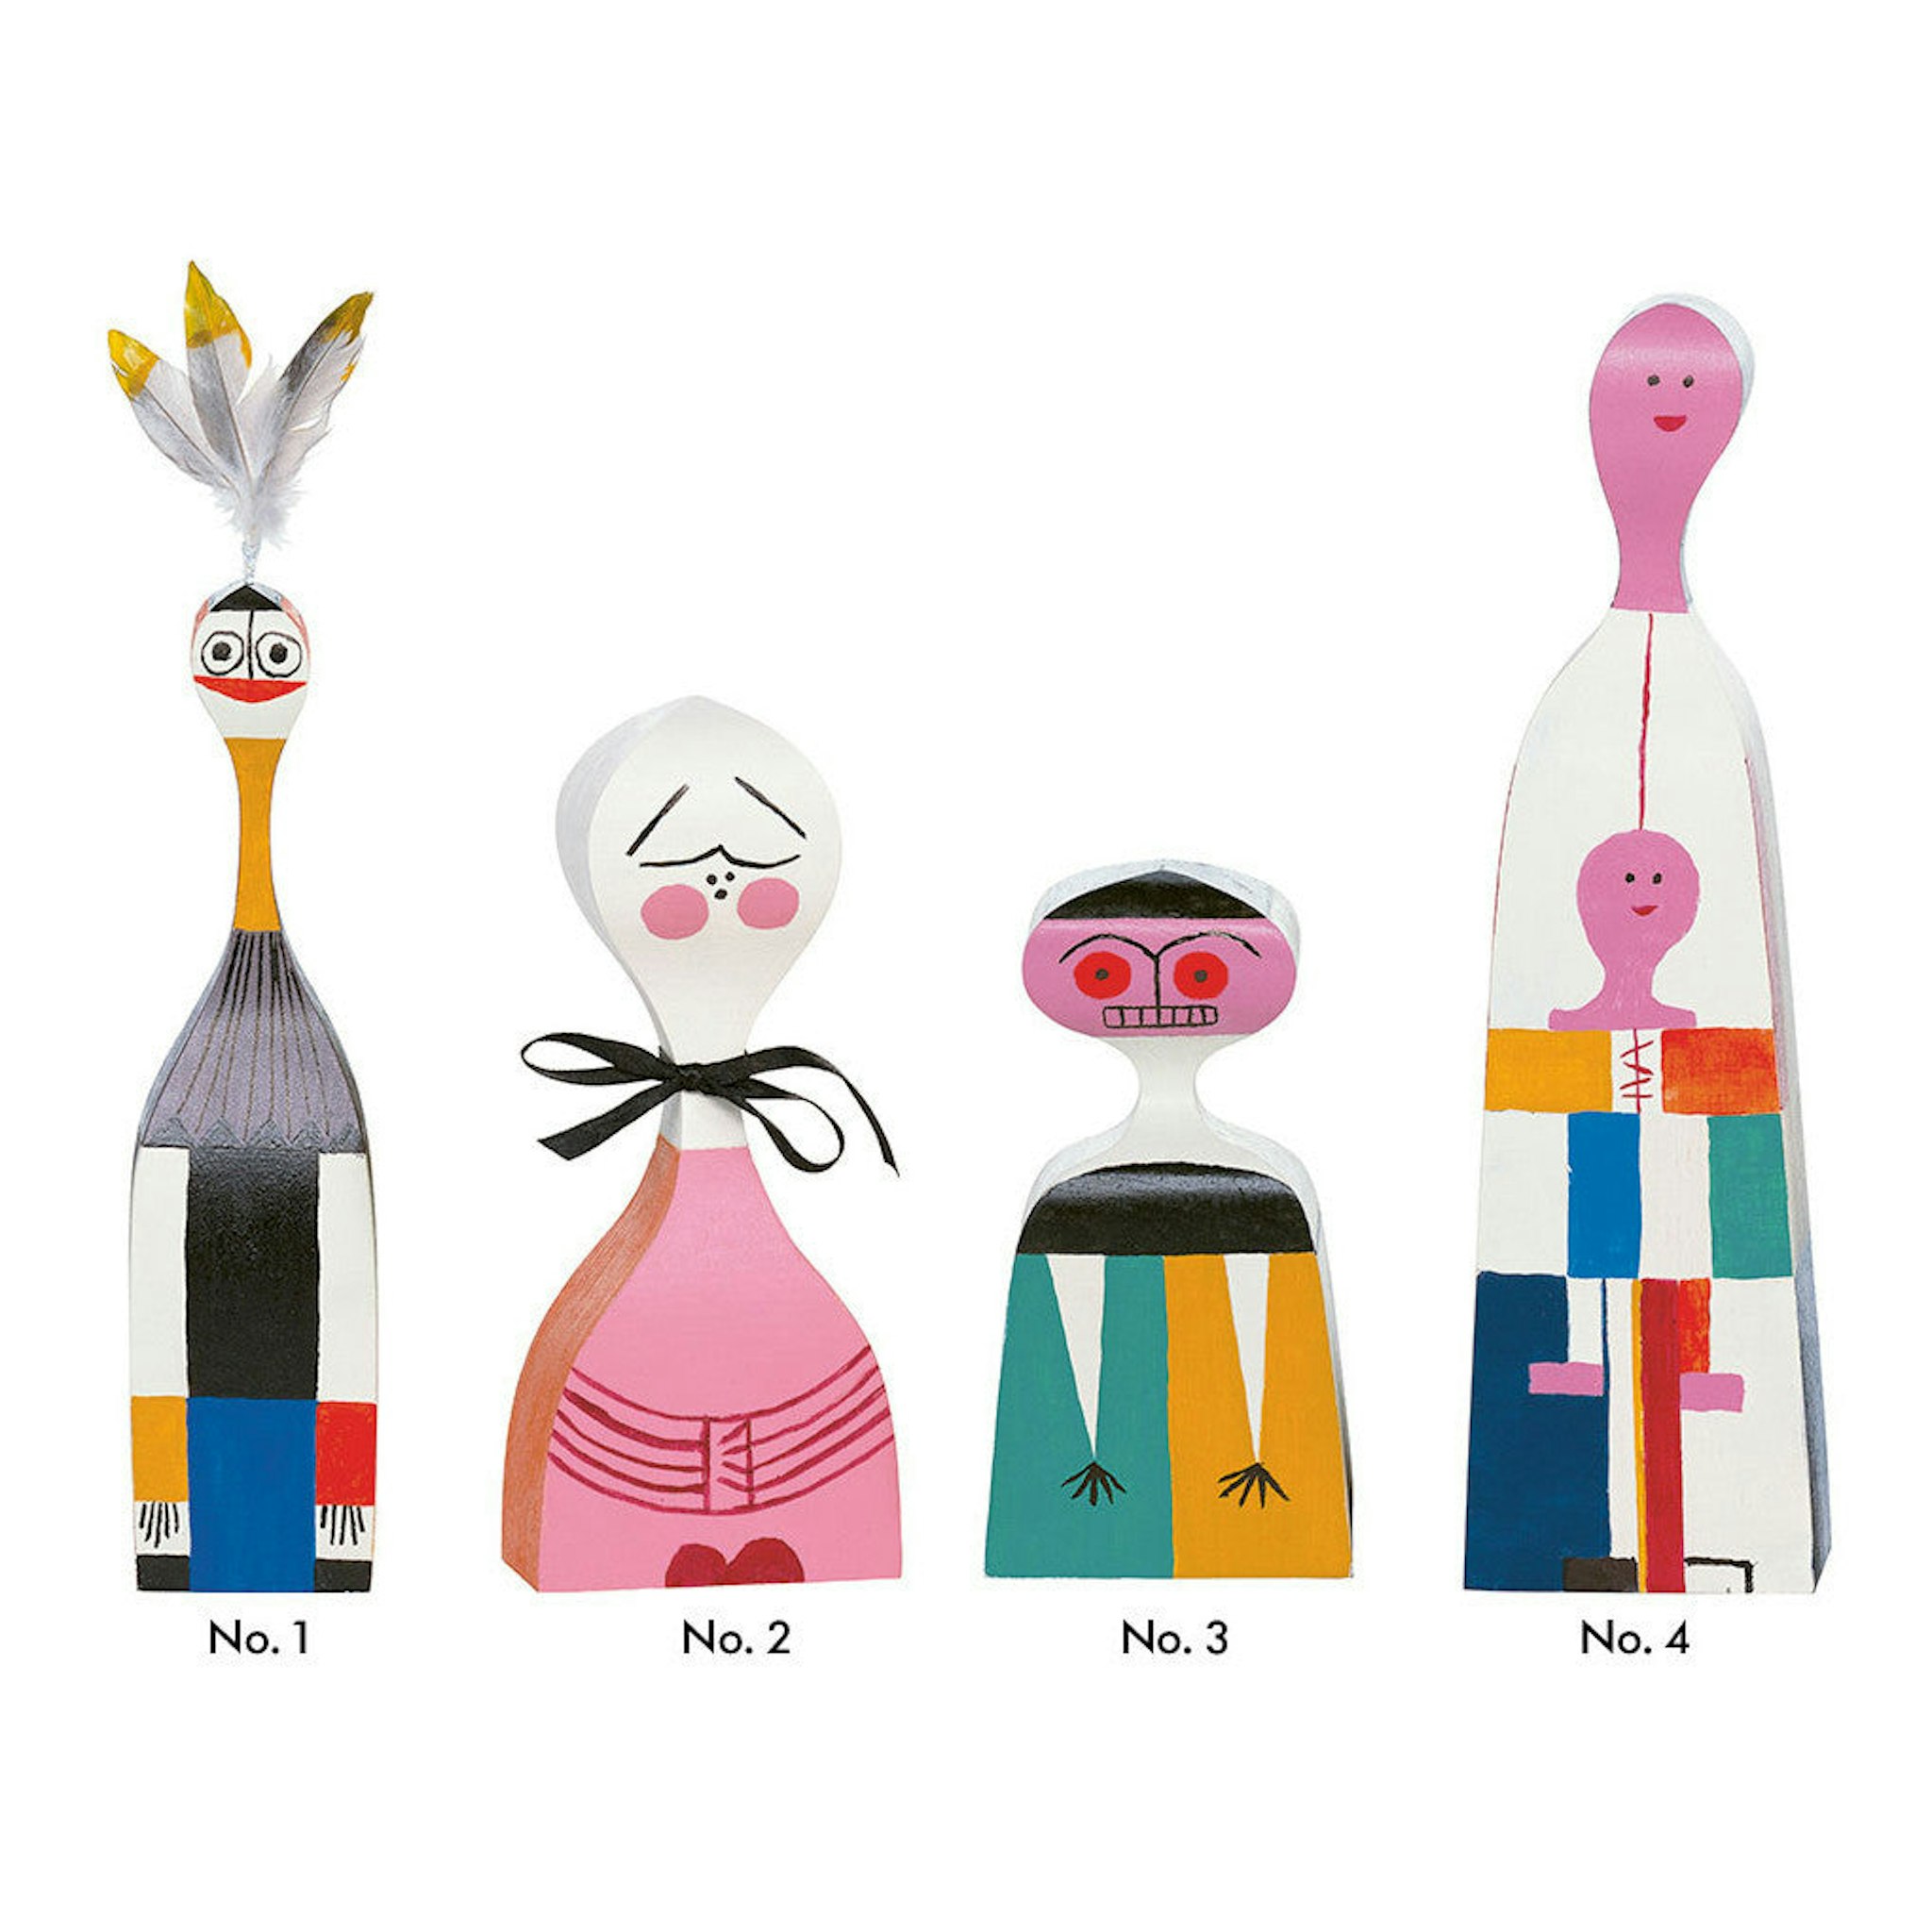 Wooden Dolls by Vitra